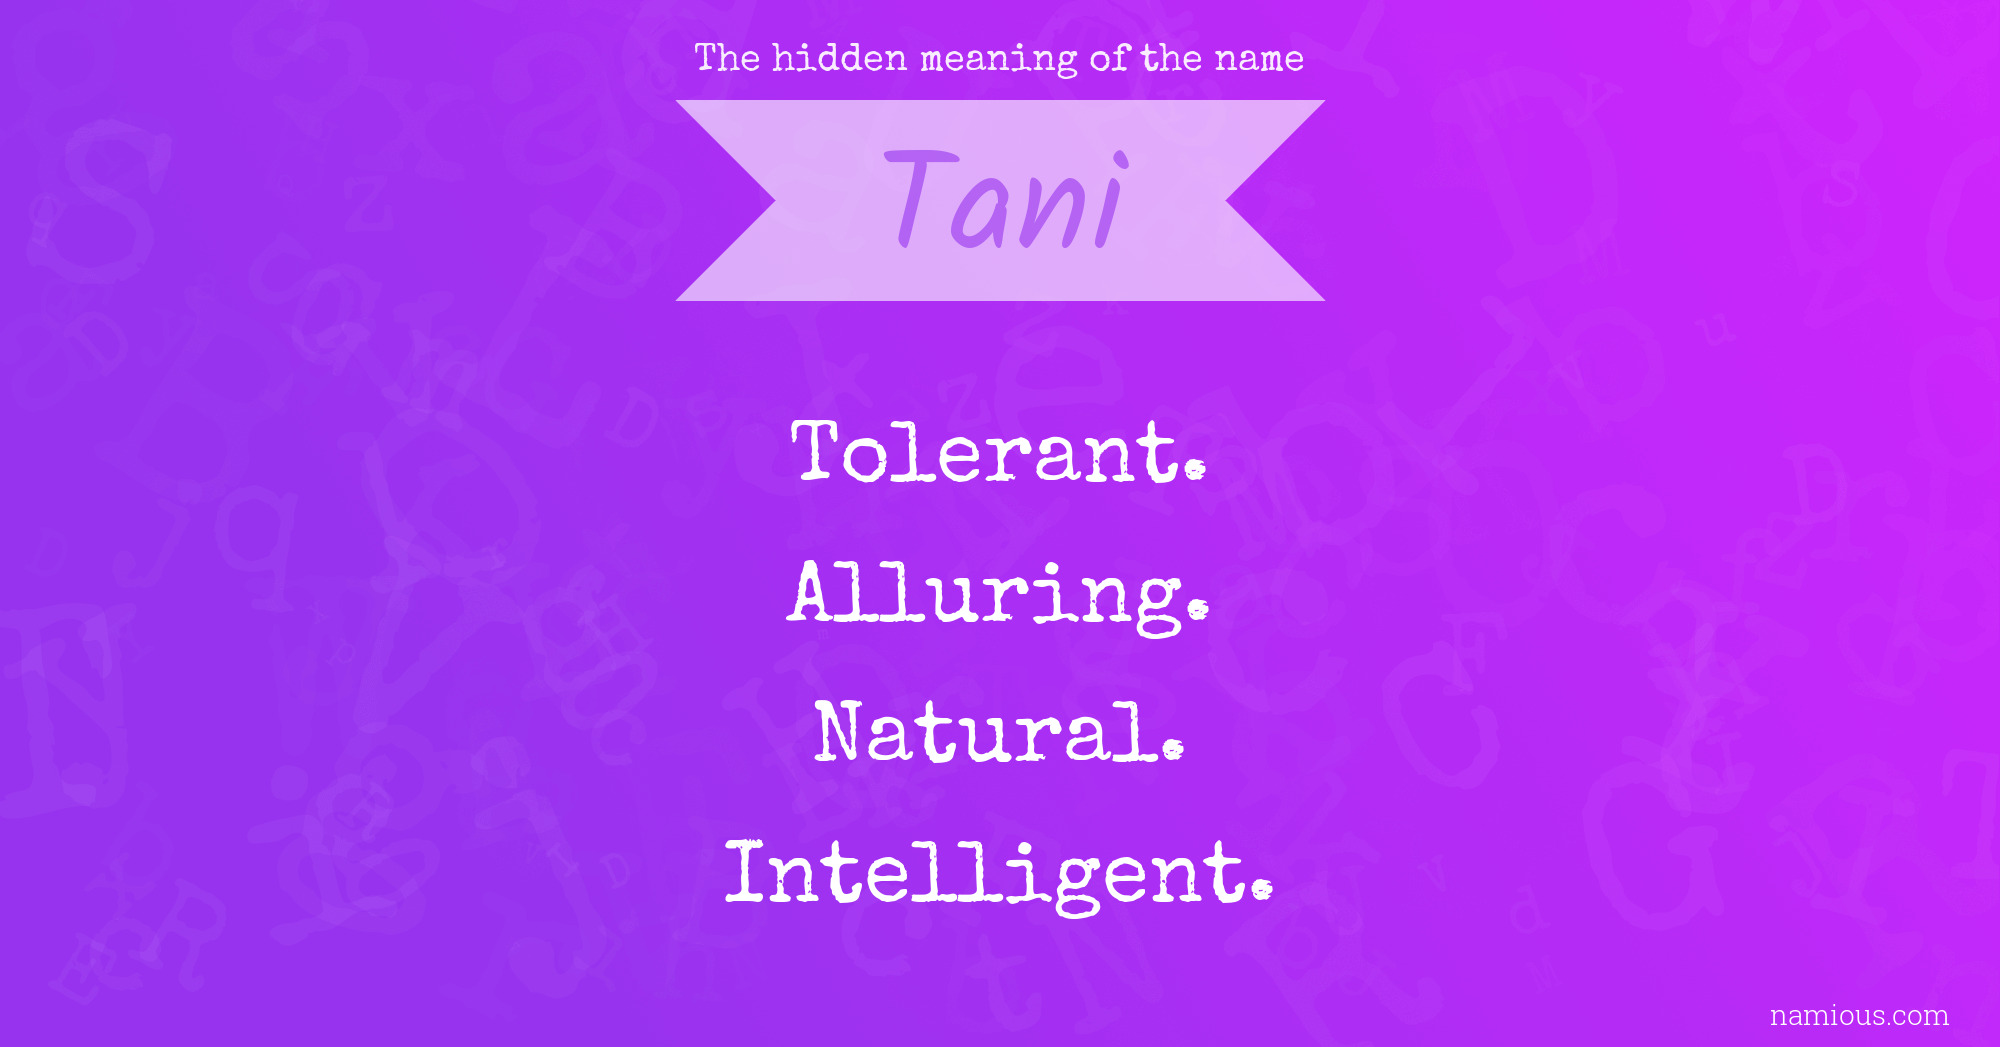 The hidden meaning of the name Tani